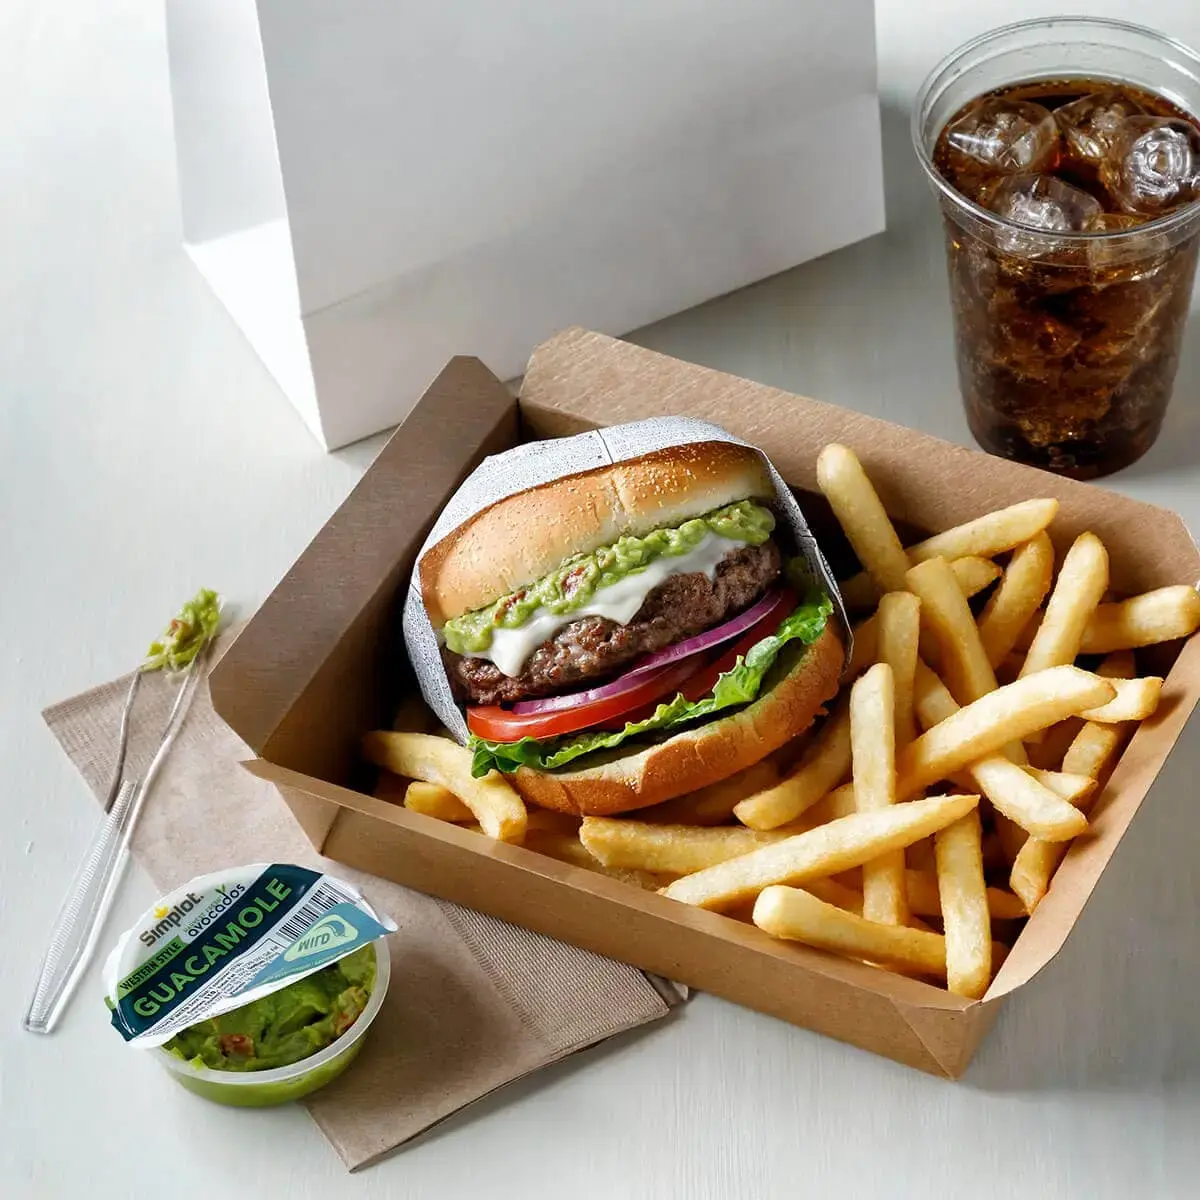 Simplot Harvest Fresh™ Avocado 2 oz cups with Burger and Fries